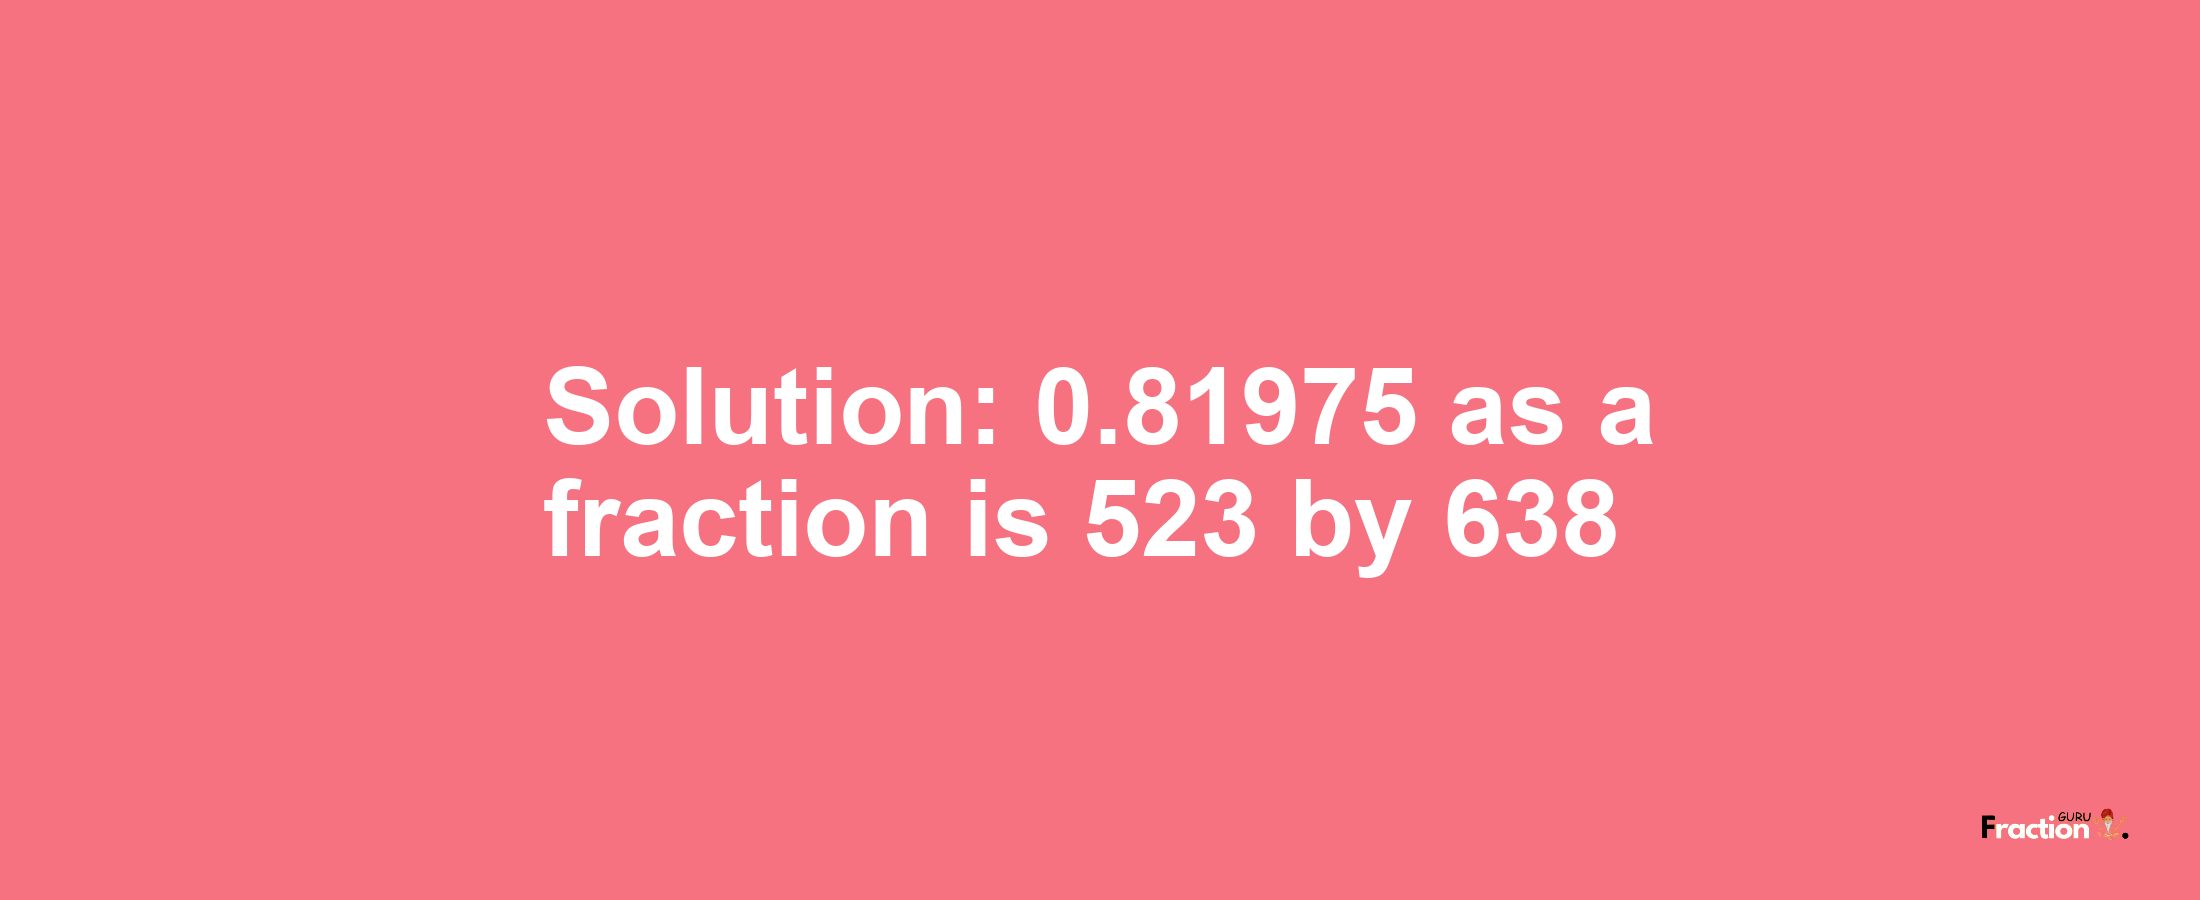 Solution:0.81975 as a fraction is 523/638